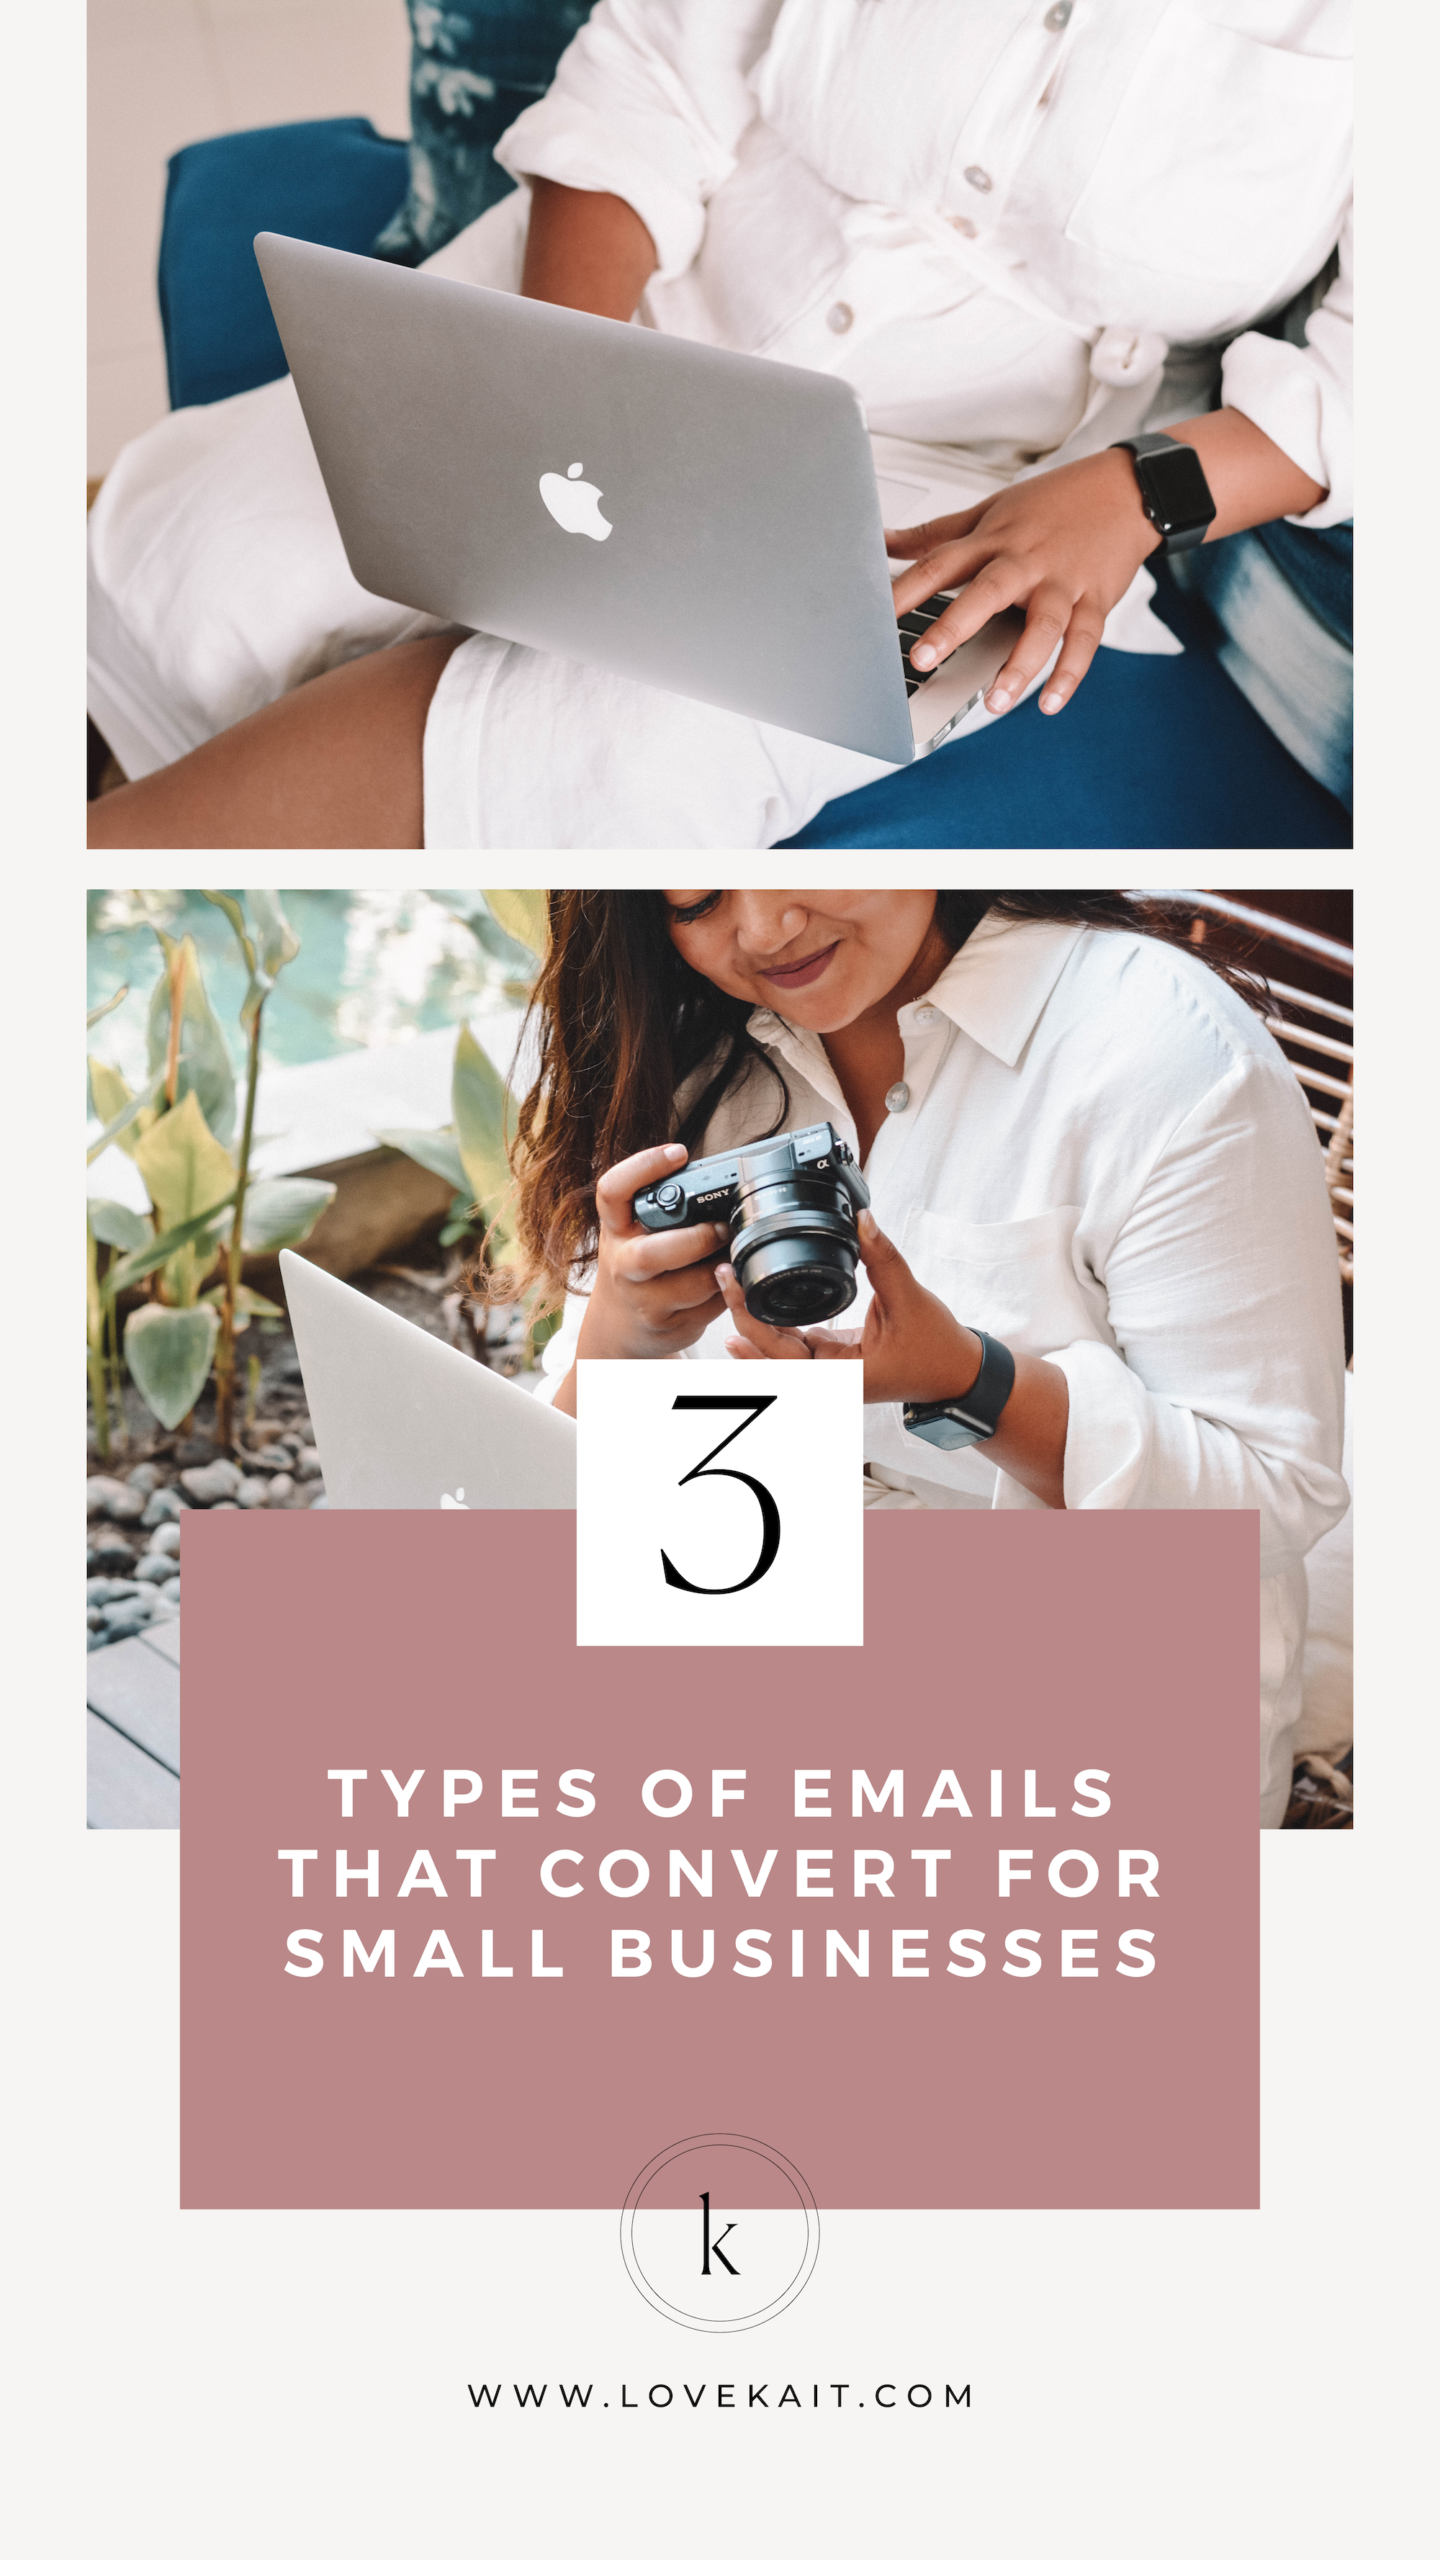 3 Types of Emails that Convert for Small Businesses